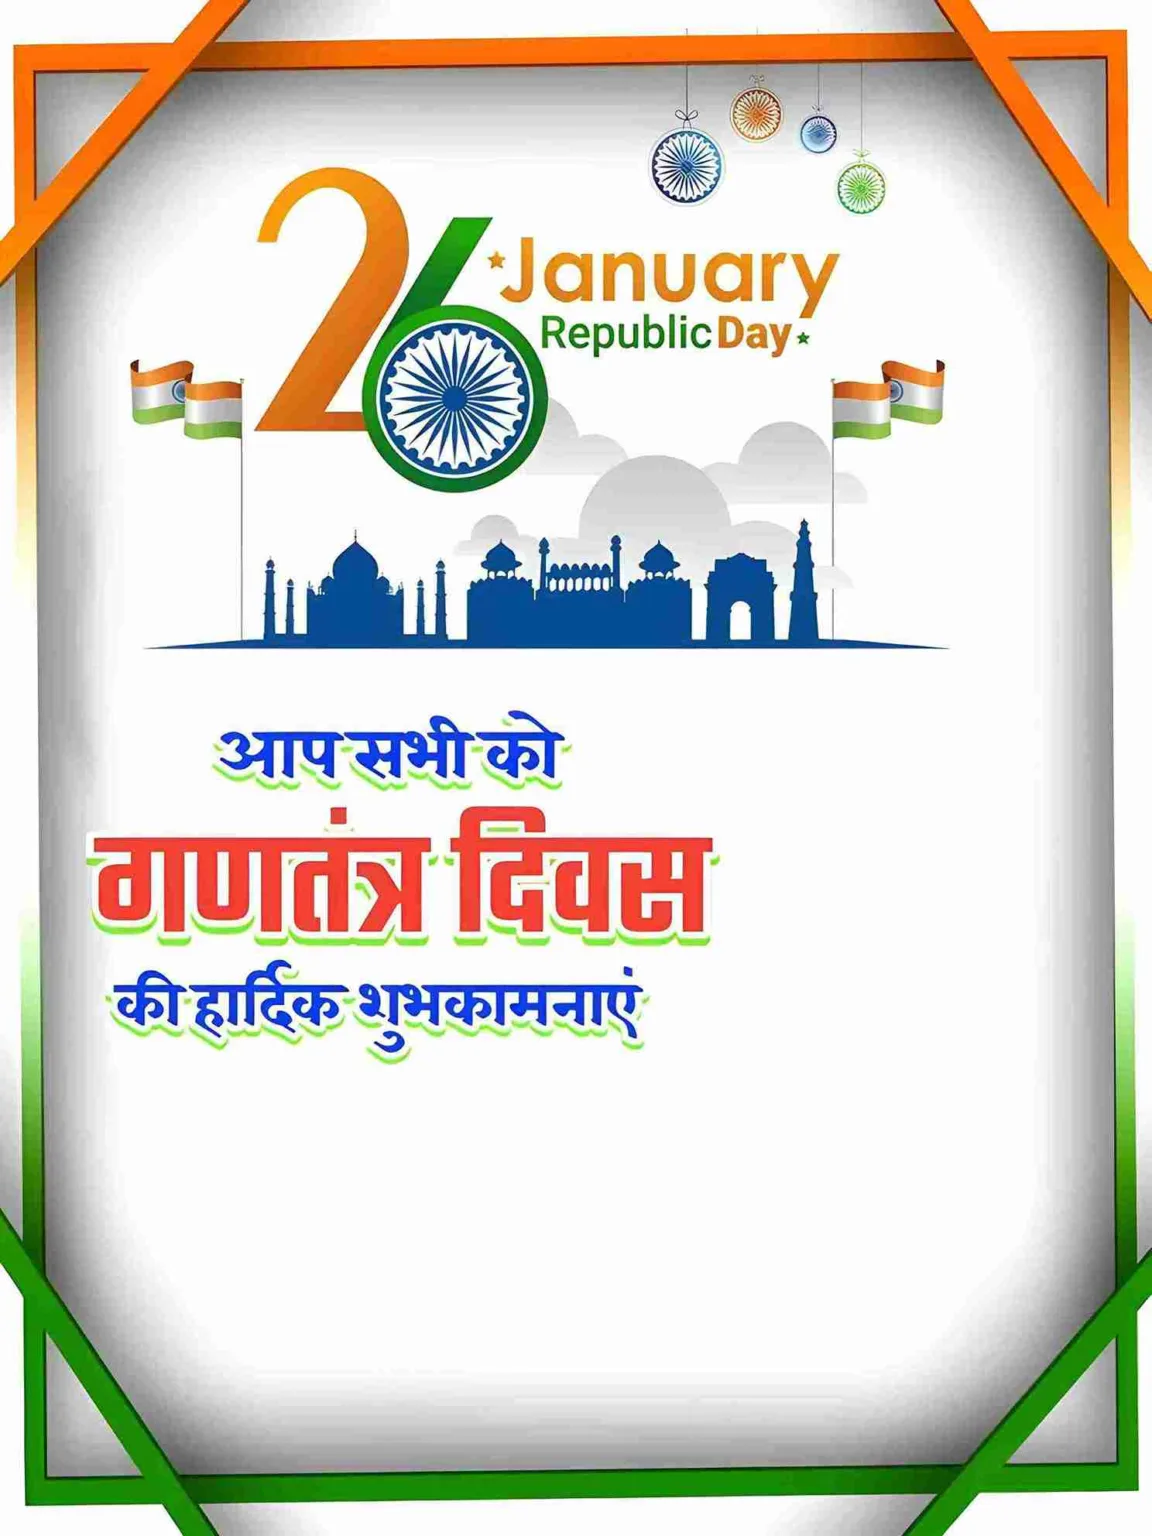 26 January (Republic Day) wishes banner in Hindi